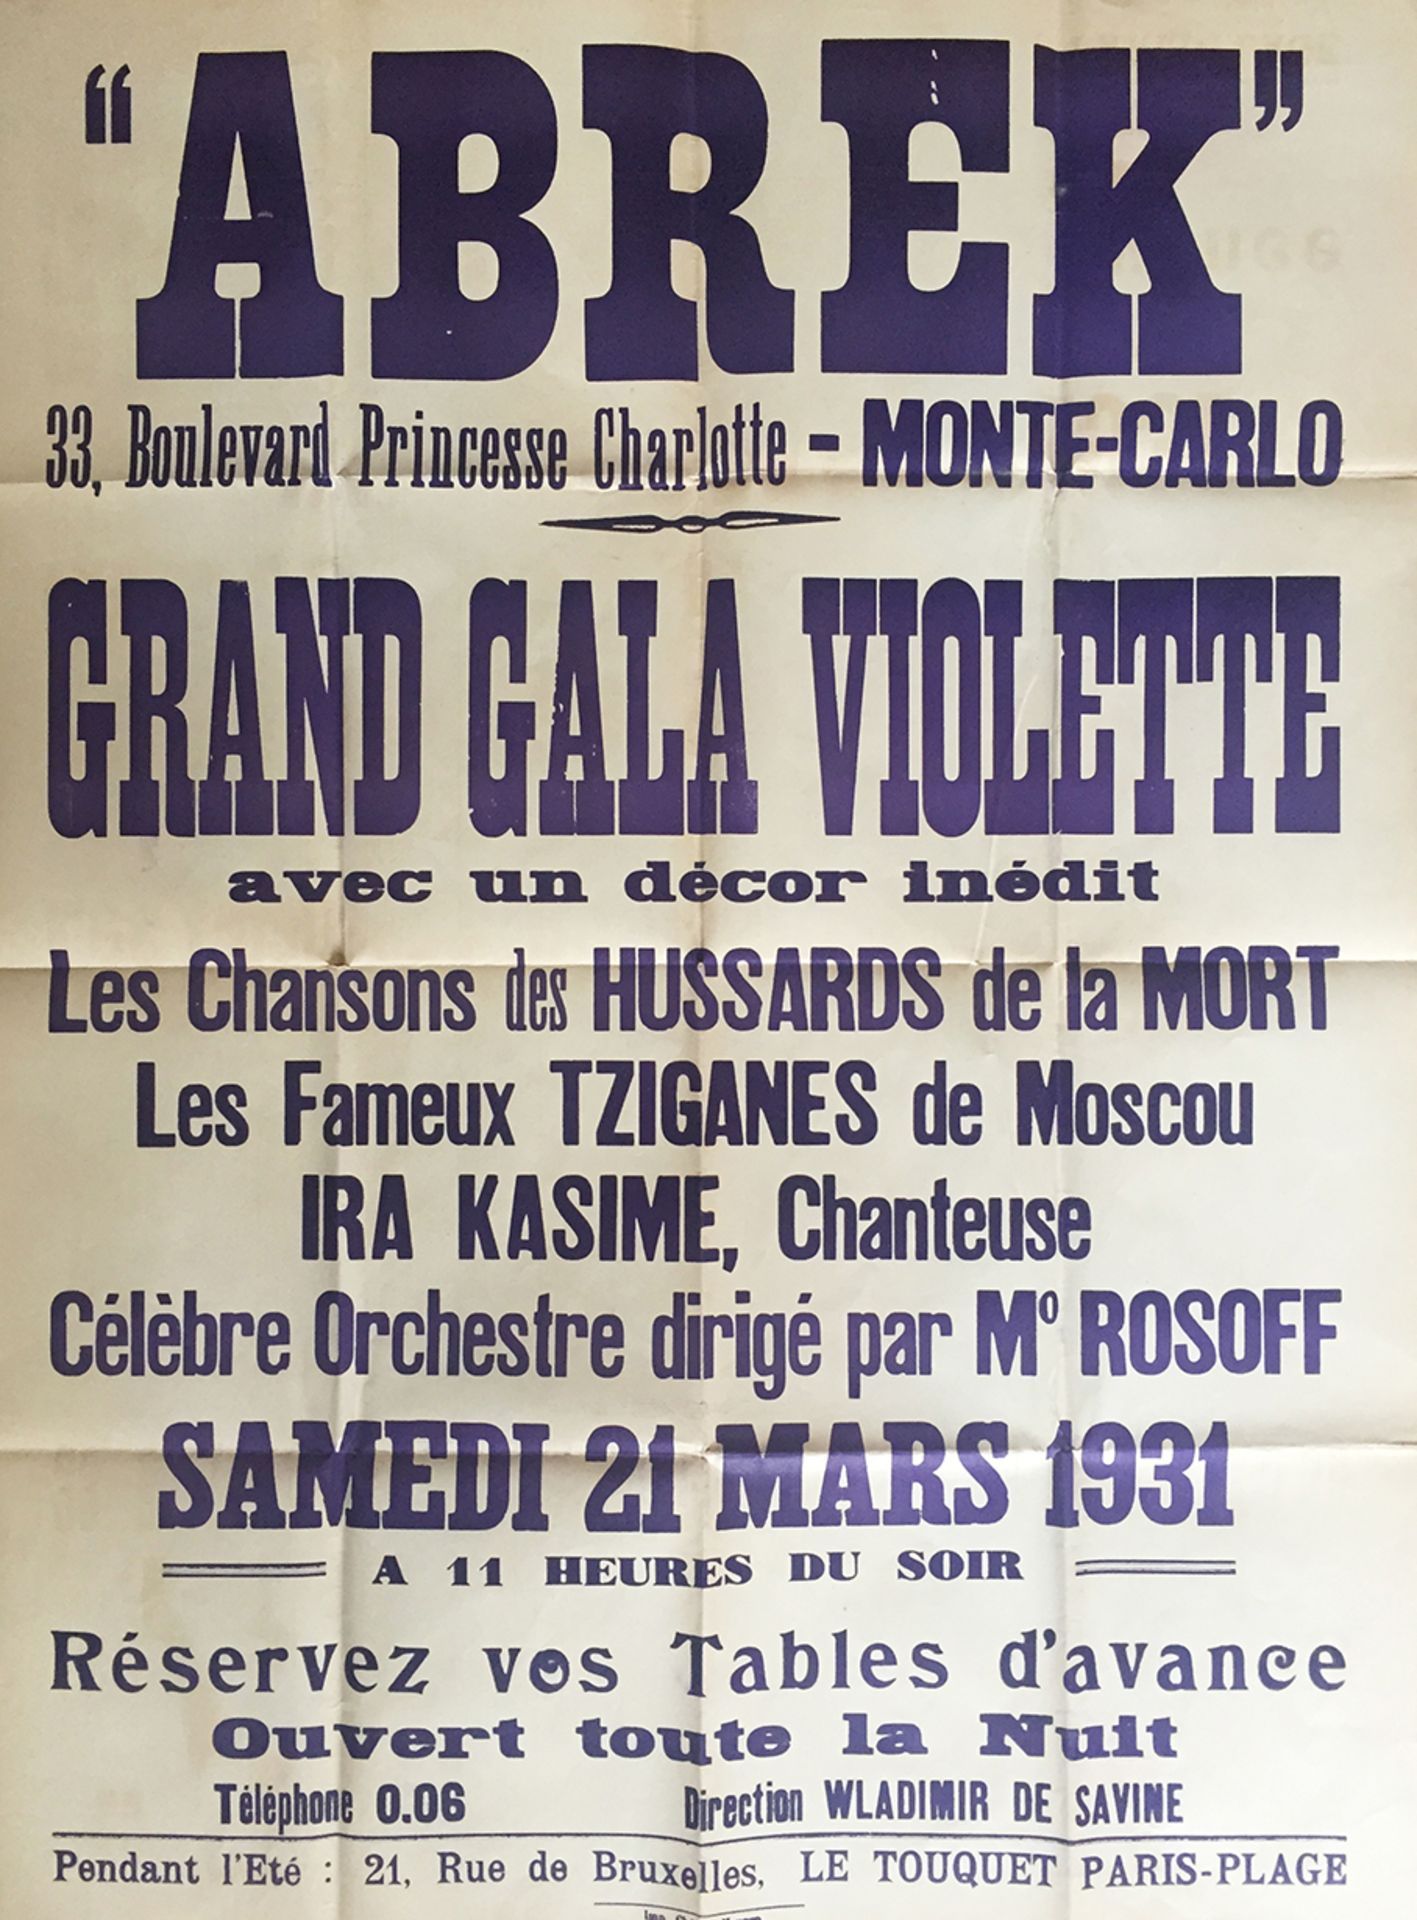 Archives of Savin, V.V. - the owner of Cabaret Abrek in Monte Carlo. - Six posters of [...]